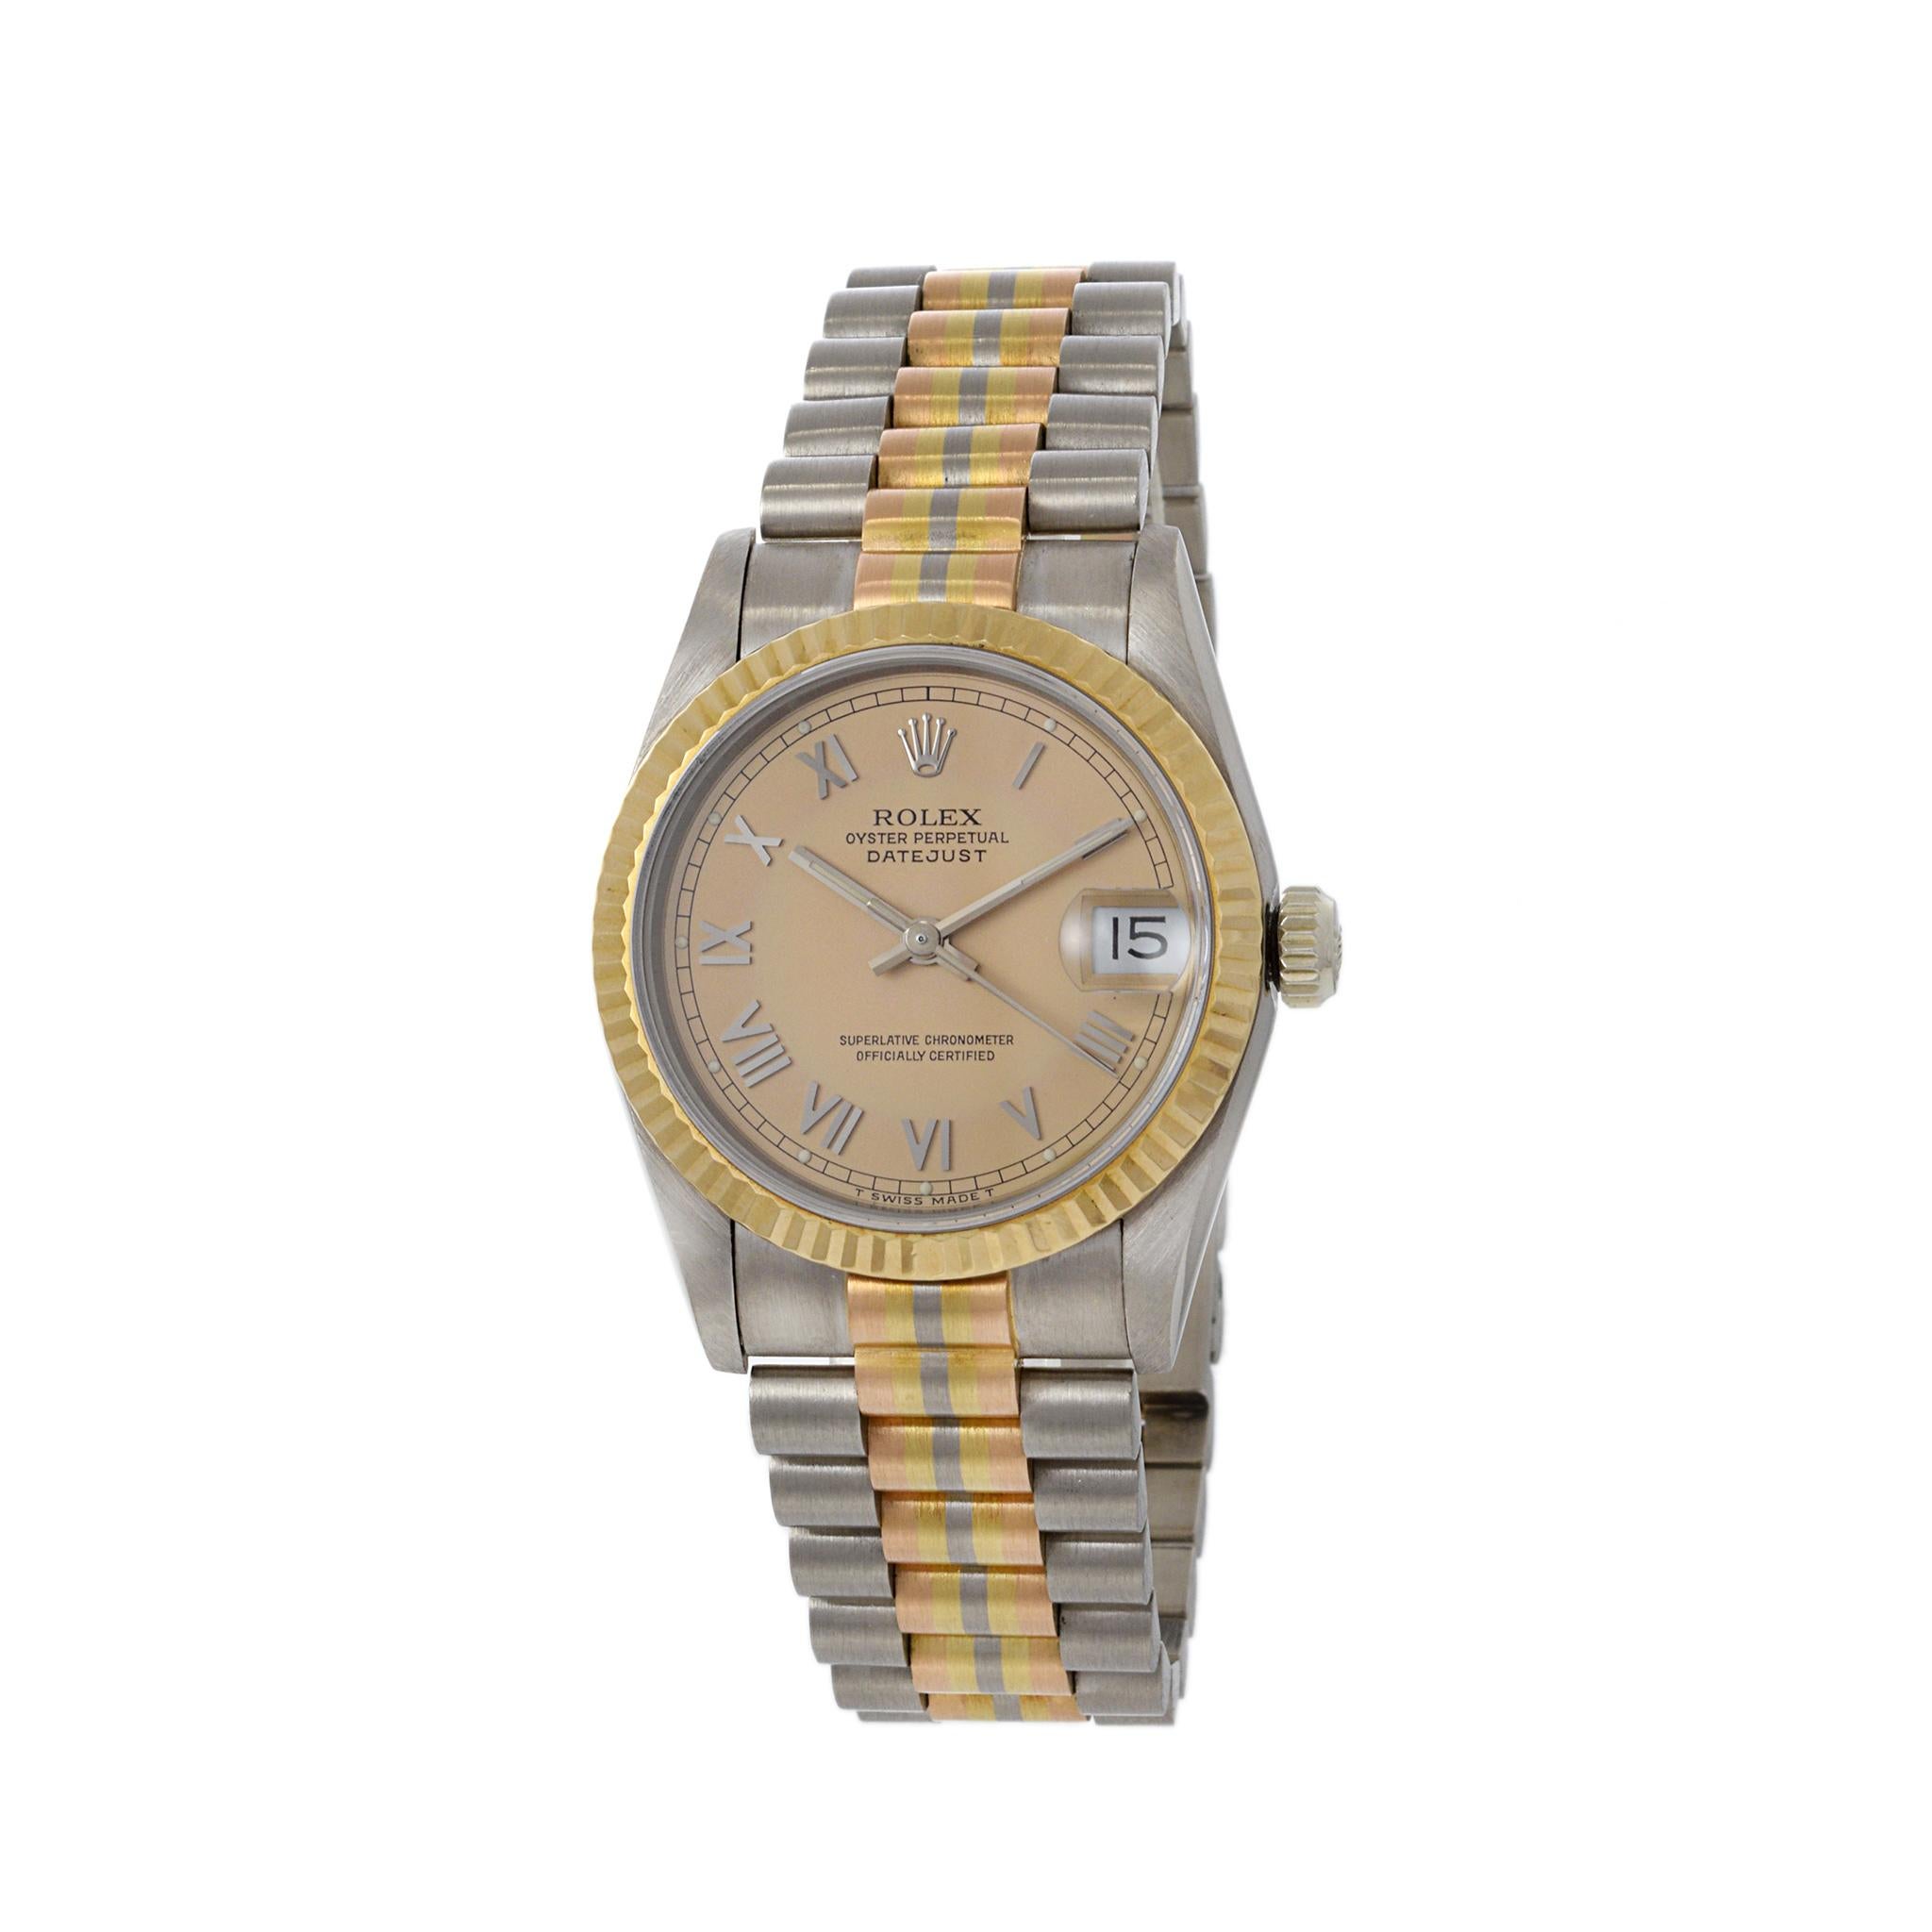 The Rolex 68279BIC Tridor with tri tone presidential bracelet is a distinguished timepiece that combines the hallmark precision of Rolex with luxurious design elements. As part of the iconic Datejust collection, this model exemplifies elegance and